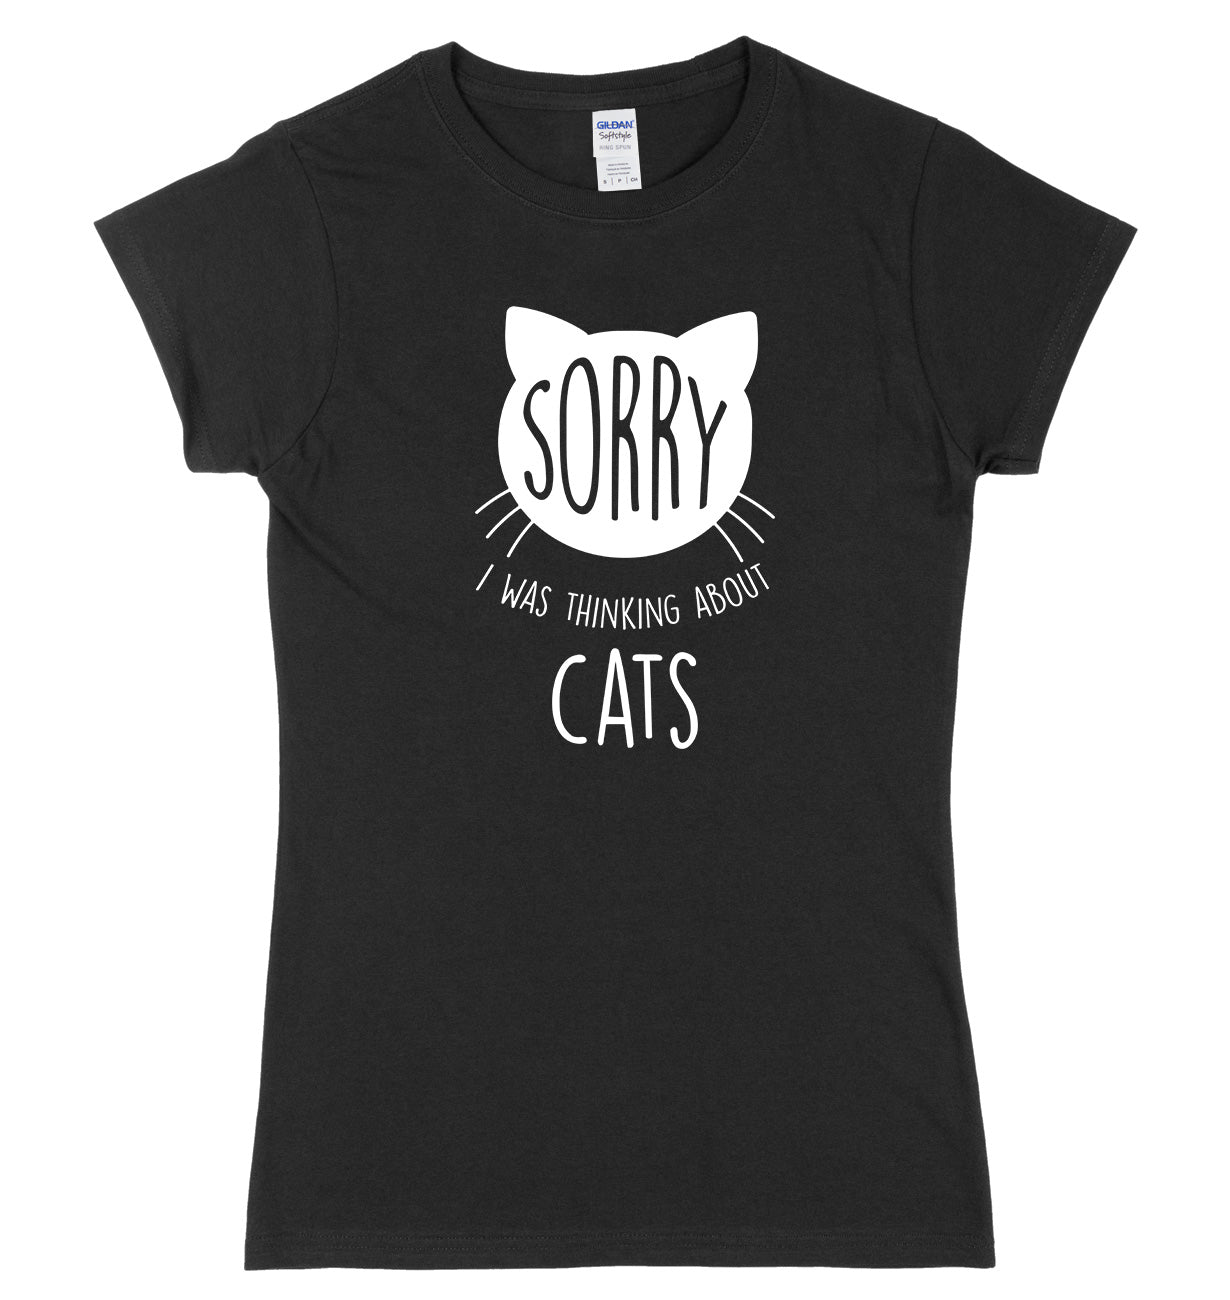 Sorry, I Was Thinking About Cats Womens Ladies Slim Fit T-Shirt